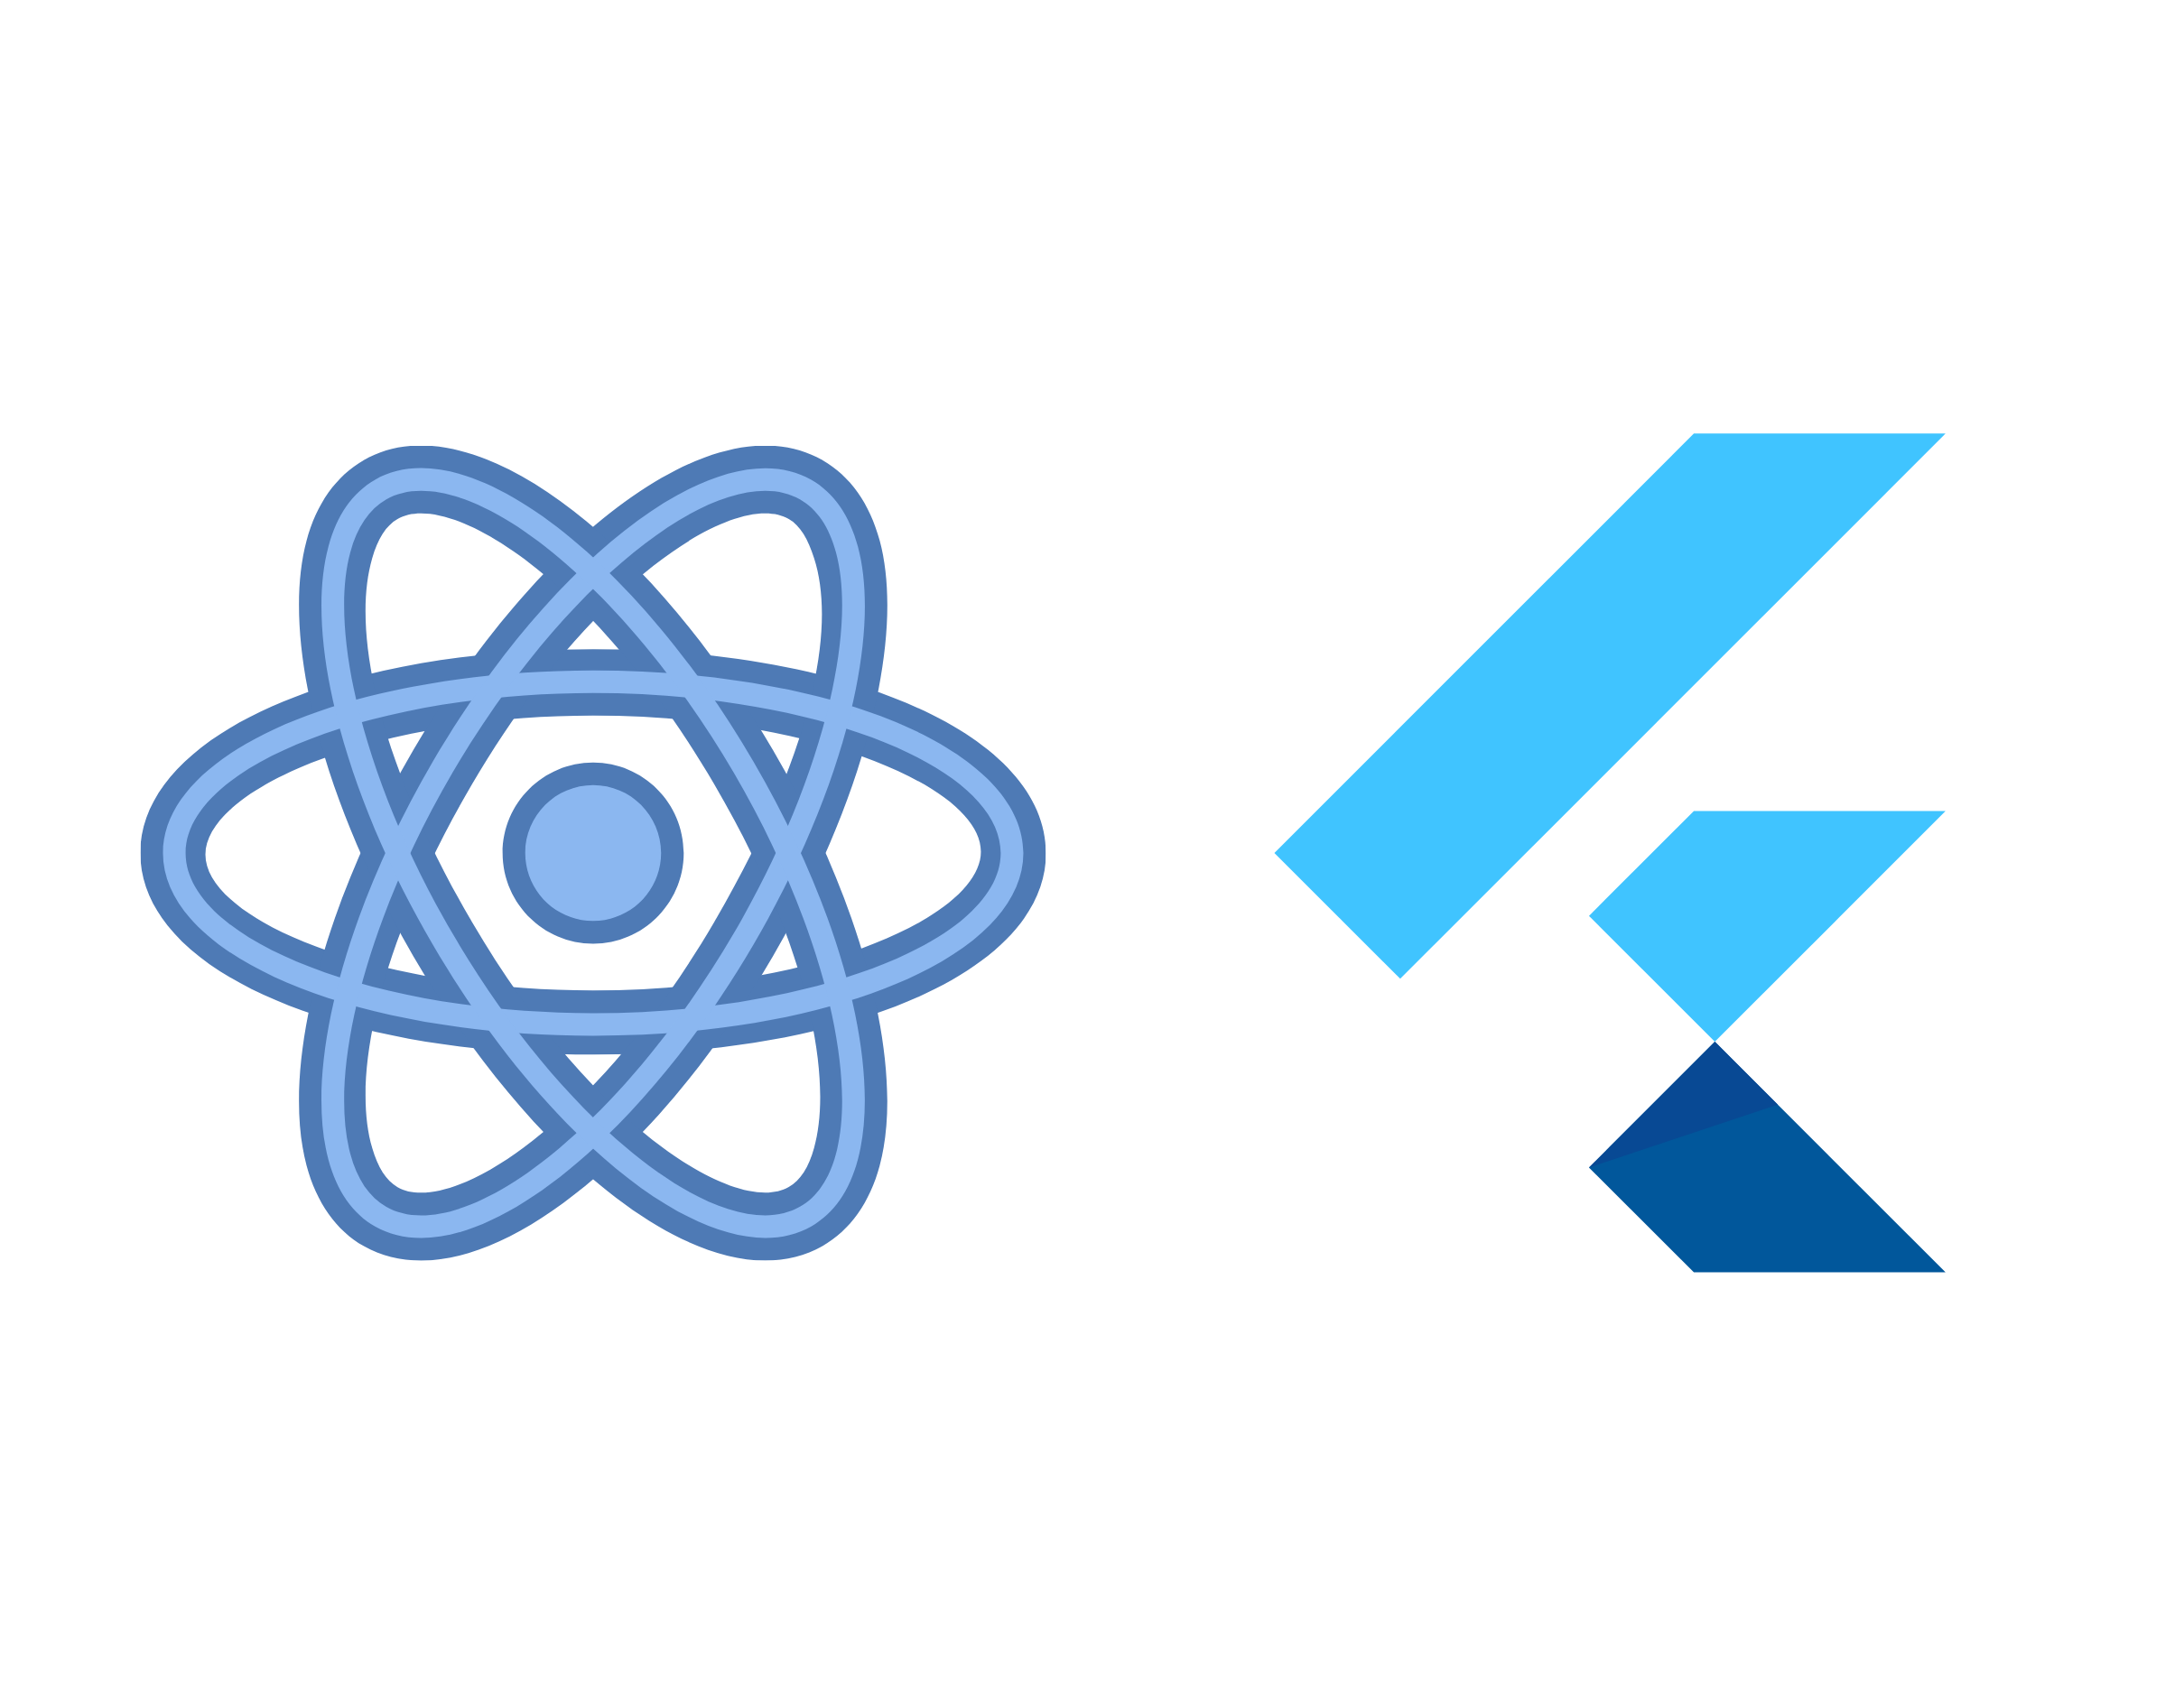 Why is React Native and Flutter are better choices for mobile development in 2022?